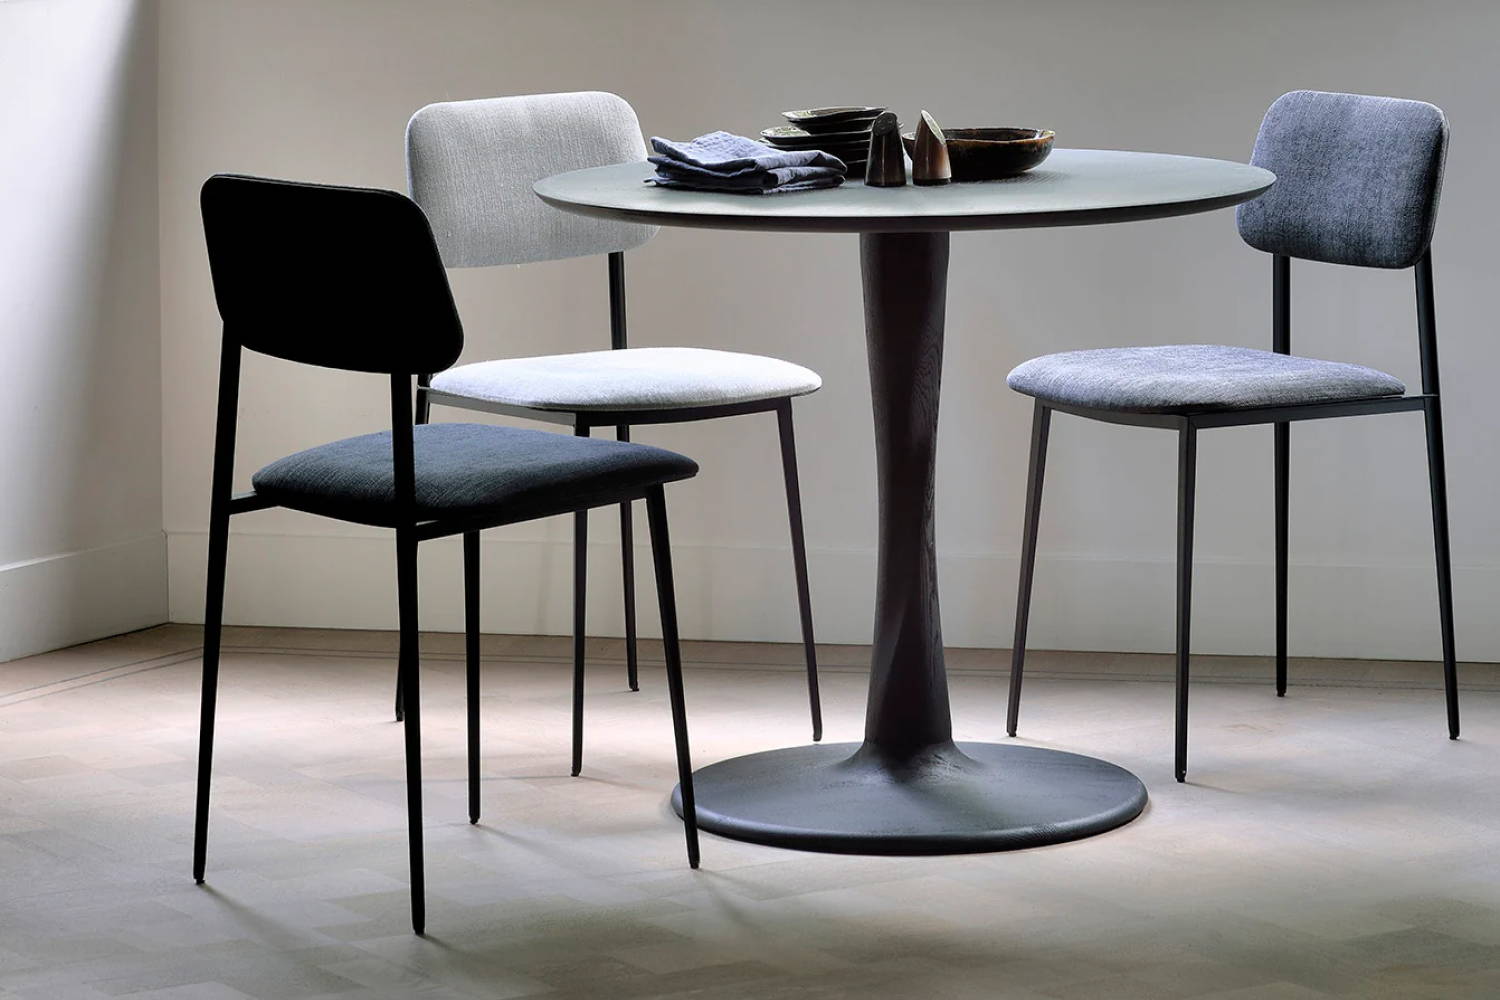 Torsion Dining Table